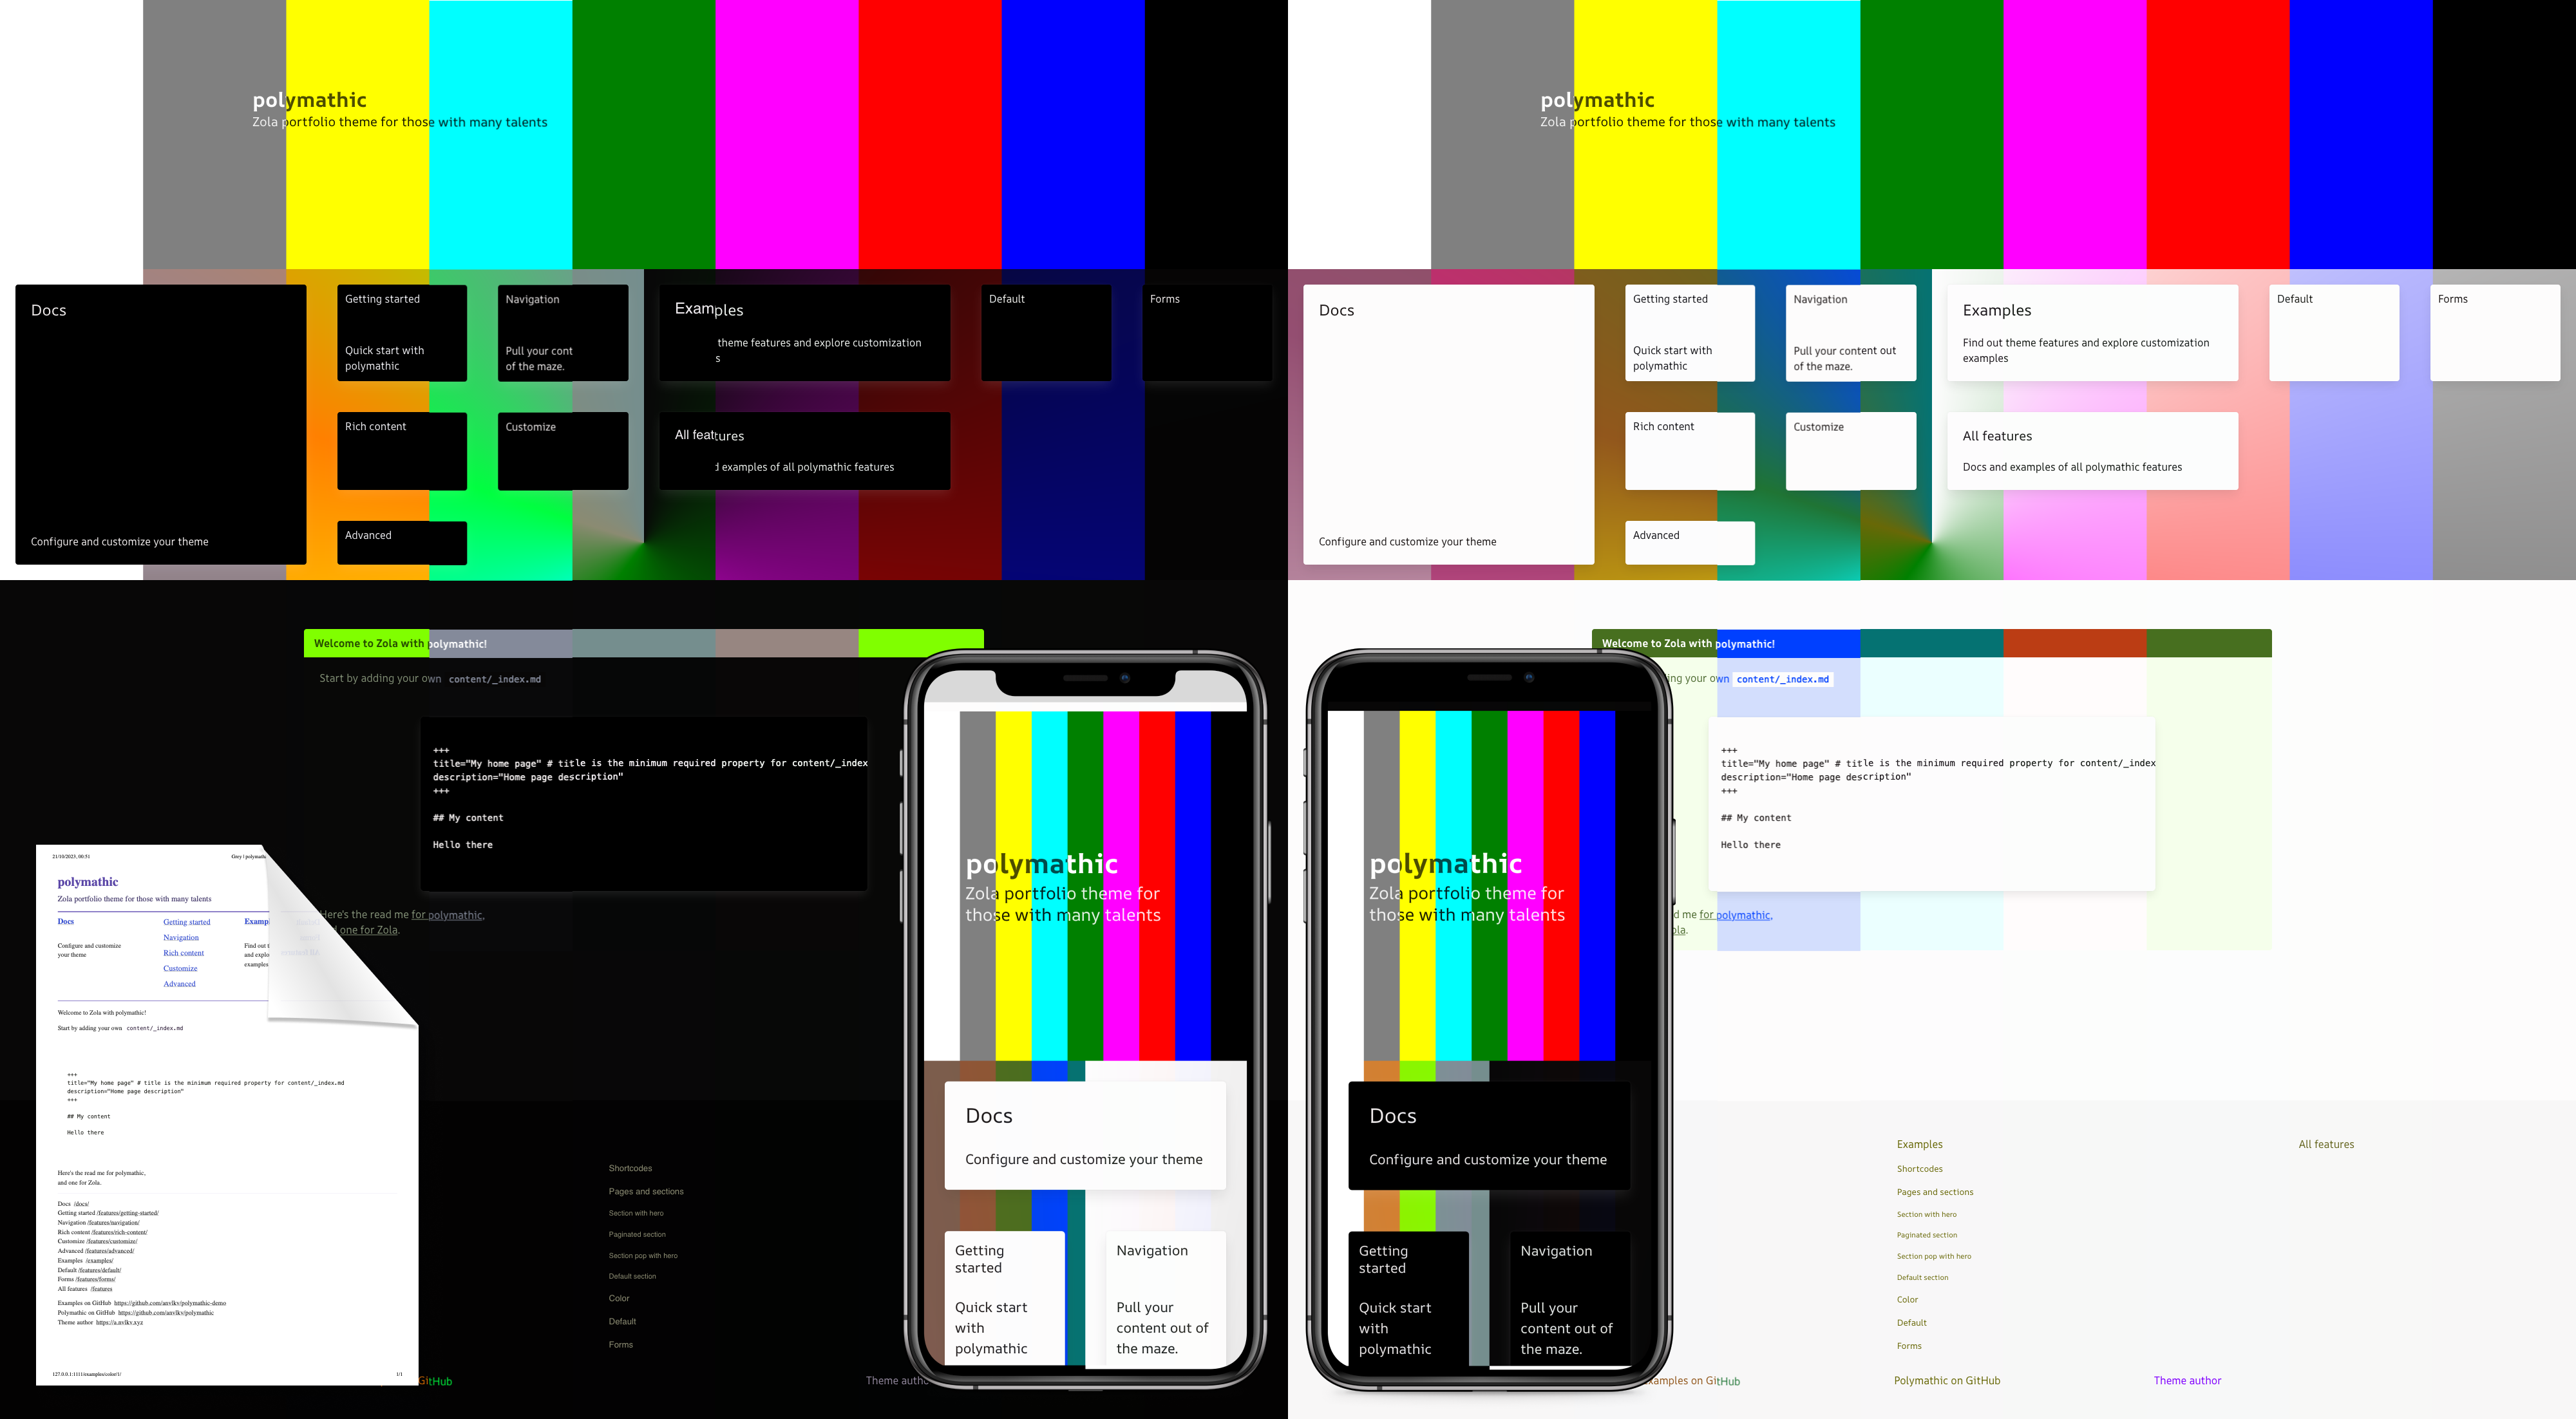 composition of screenshots of polymathic theme in multiple colors on desktop, mobile, and print